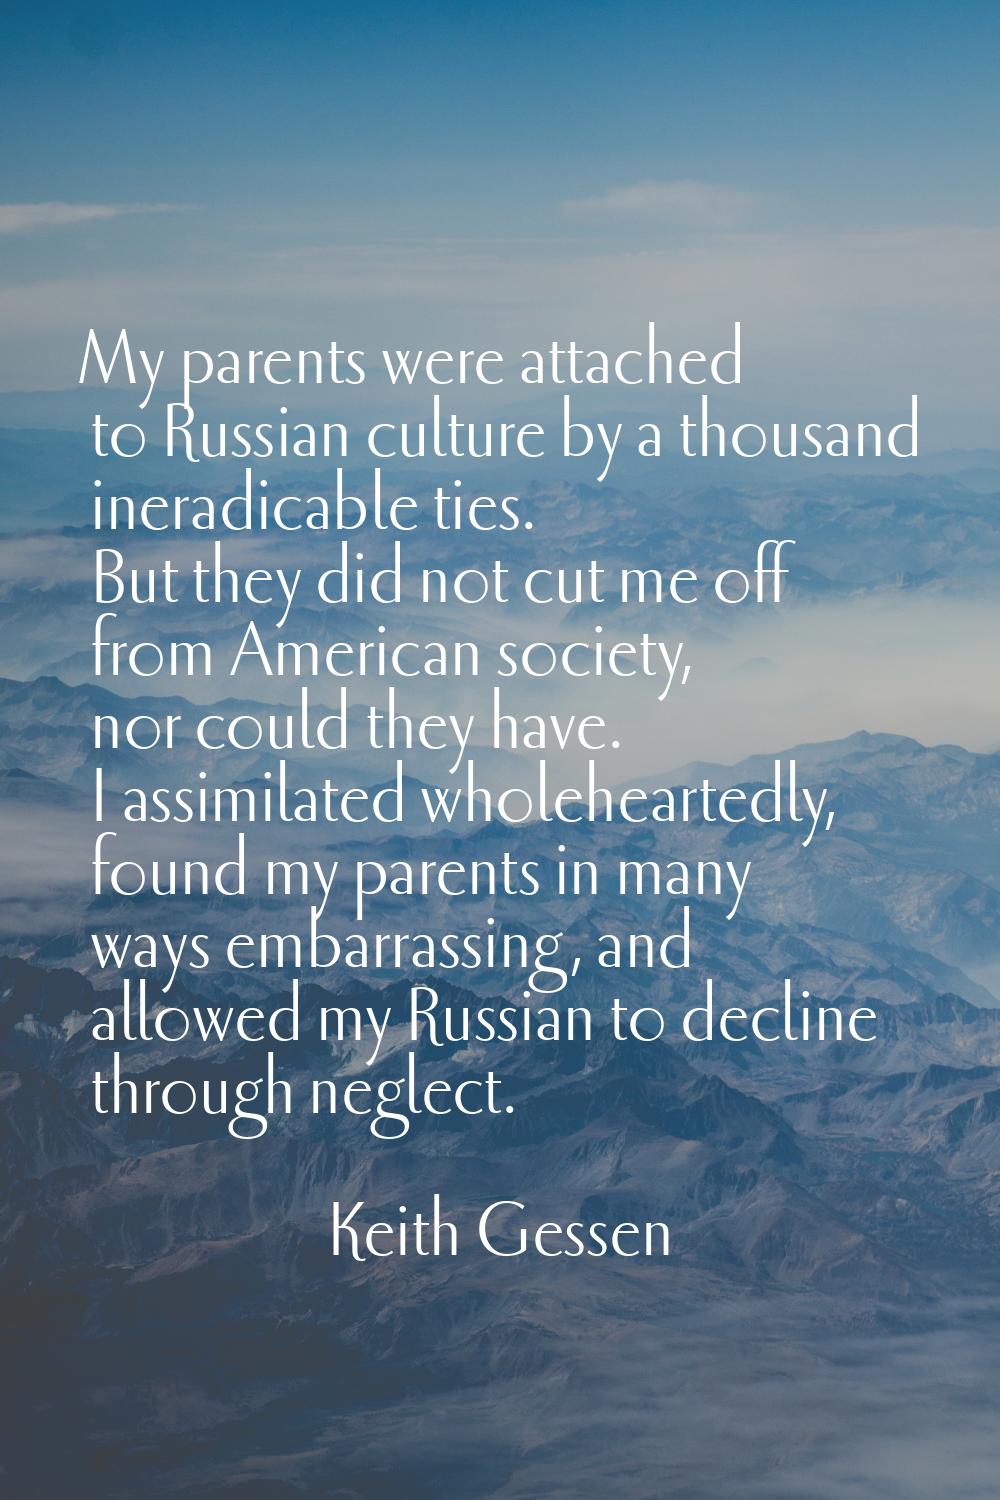 My parents were attached to Russian culture by a thousand ineradicable ties. But they did not cut m